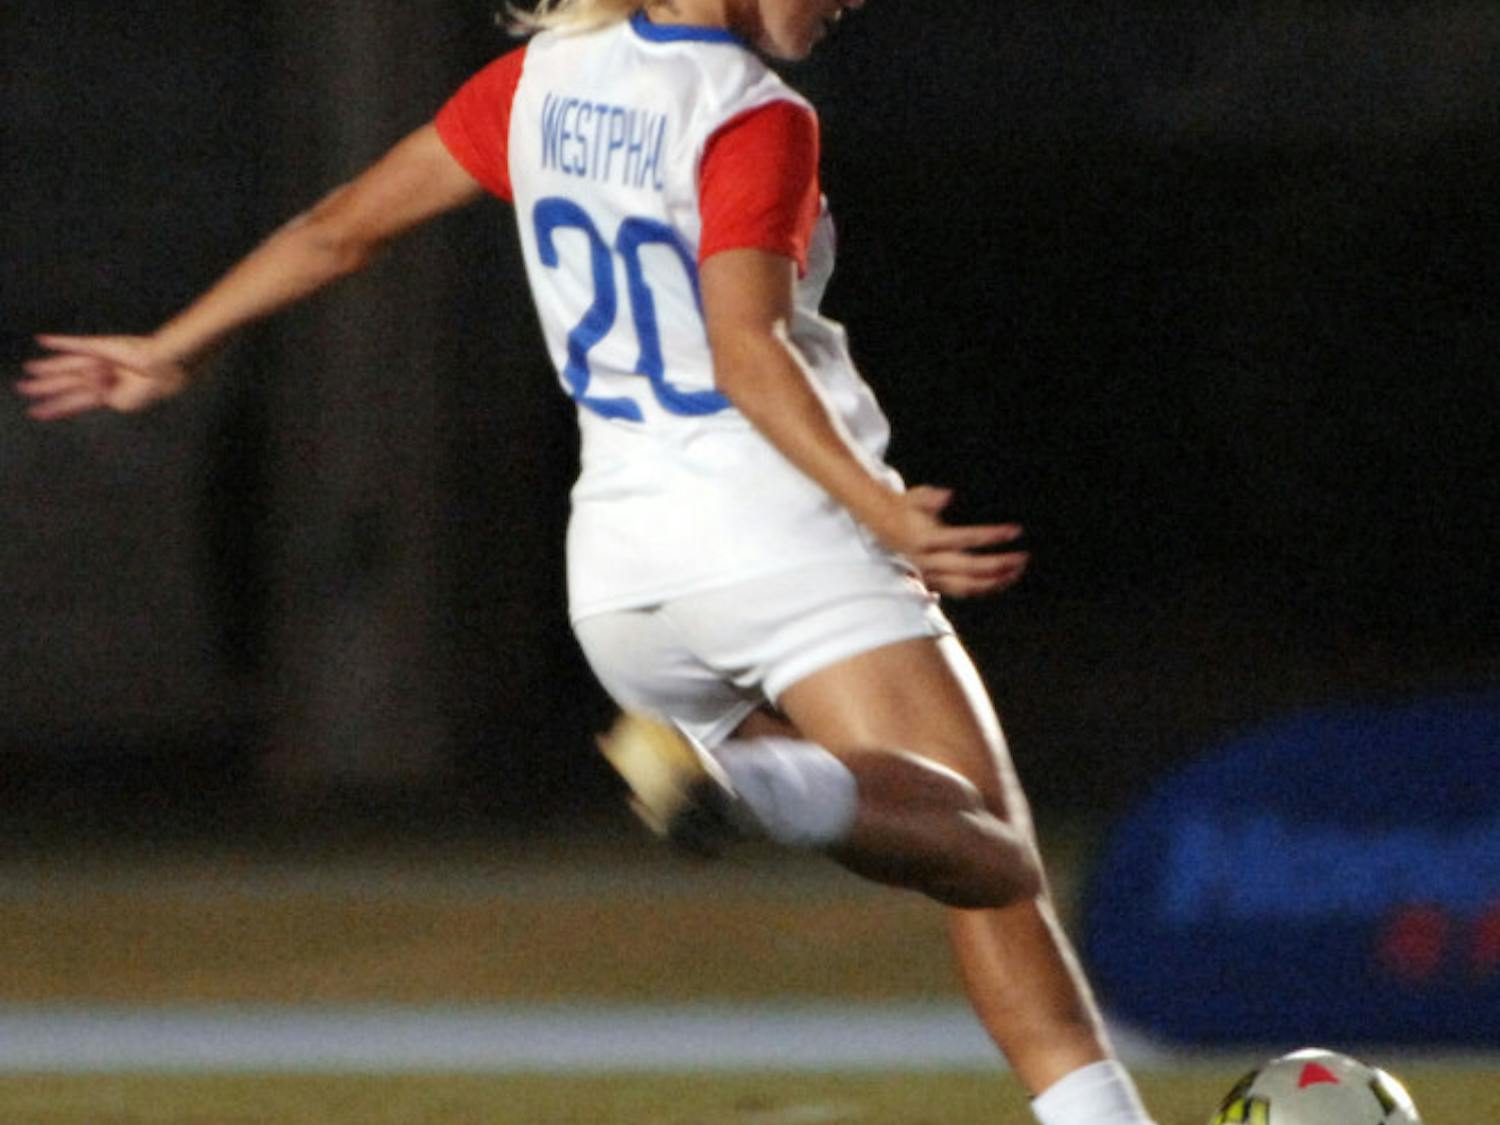 Christen Westphal (20) kicks the ball during Florida's 3-1 win against Tennessee on Friday at James G. Pressly Stadium.